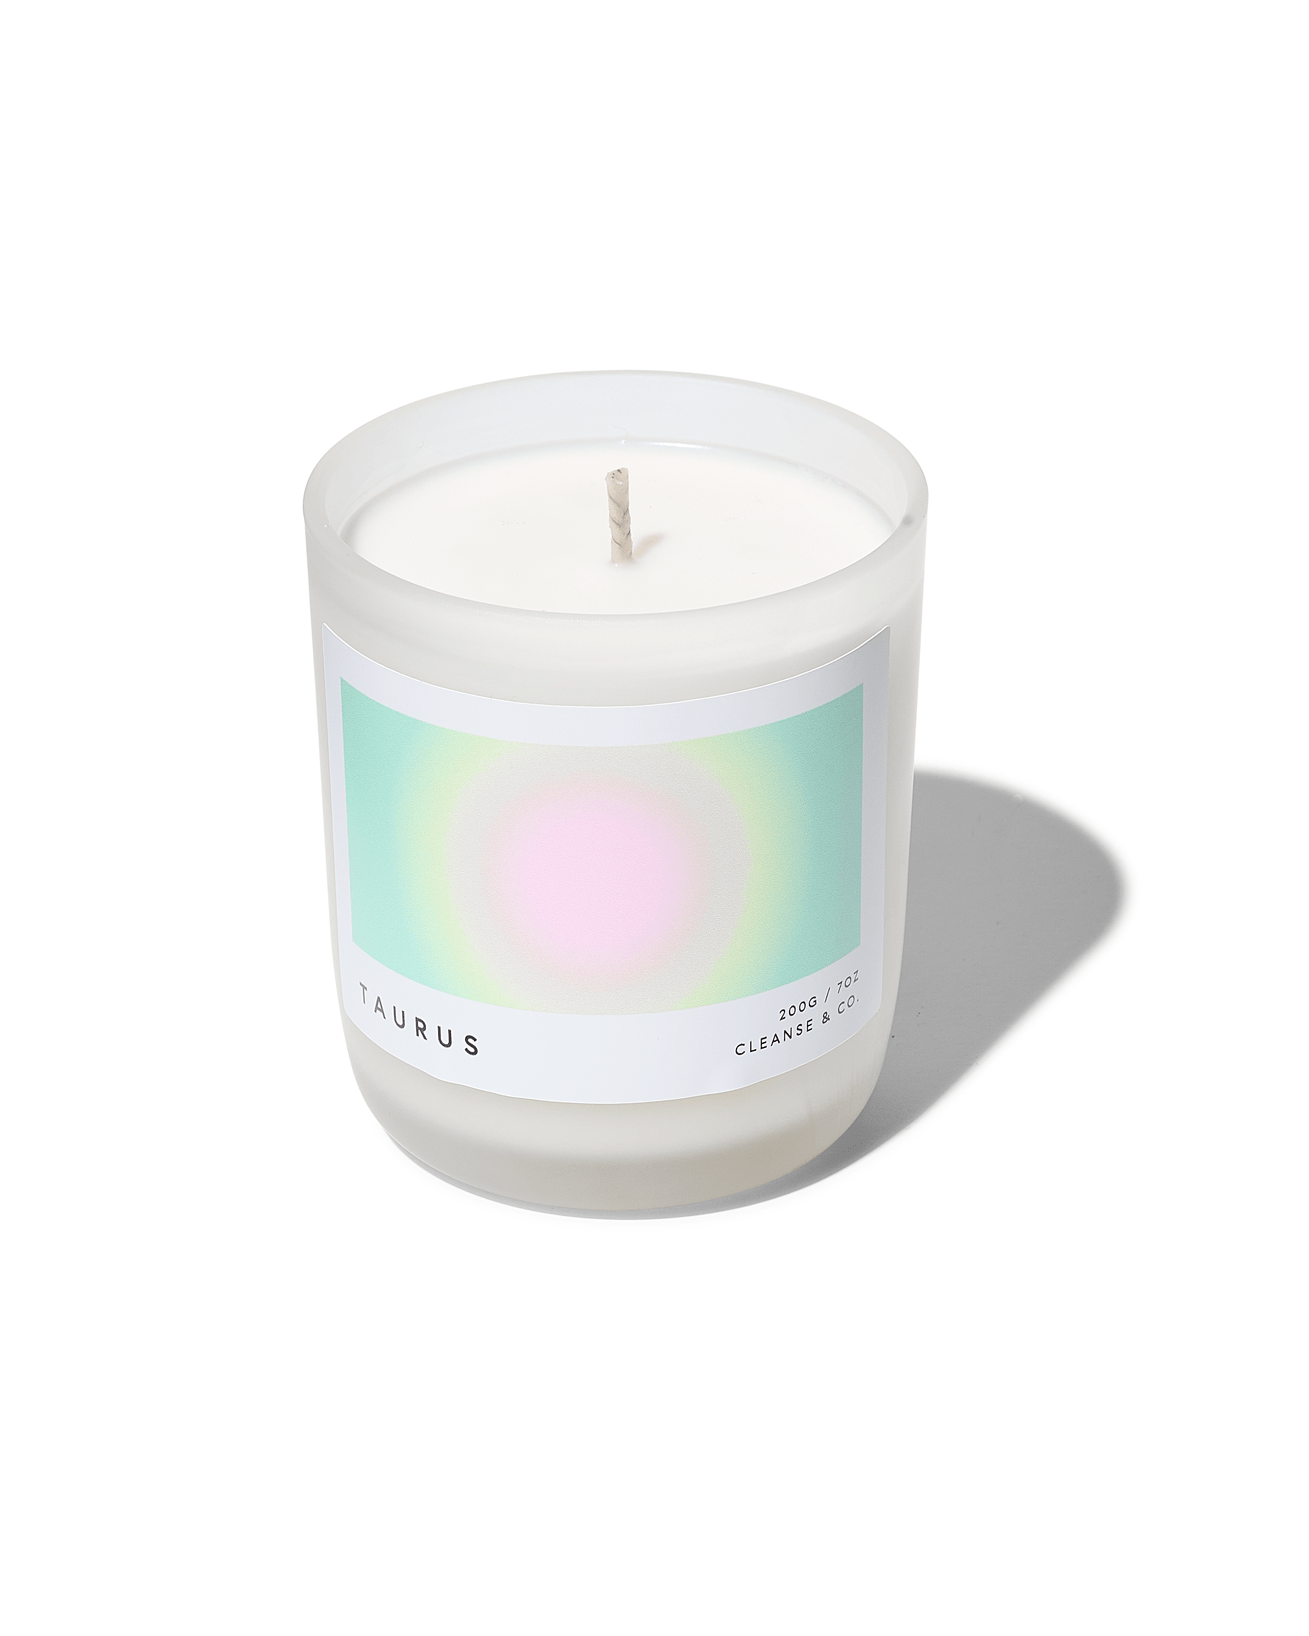 Taurus - Aura Candle: 200G / Grapefruit & White Orchid by Cleanse & Co.